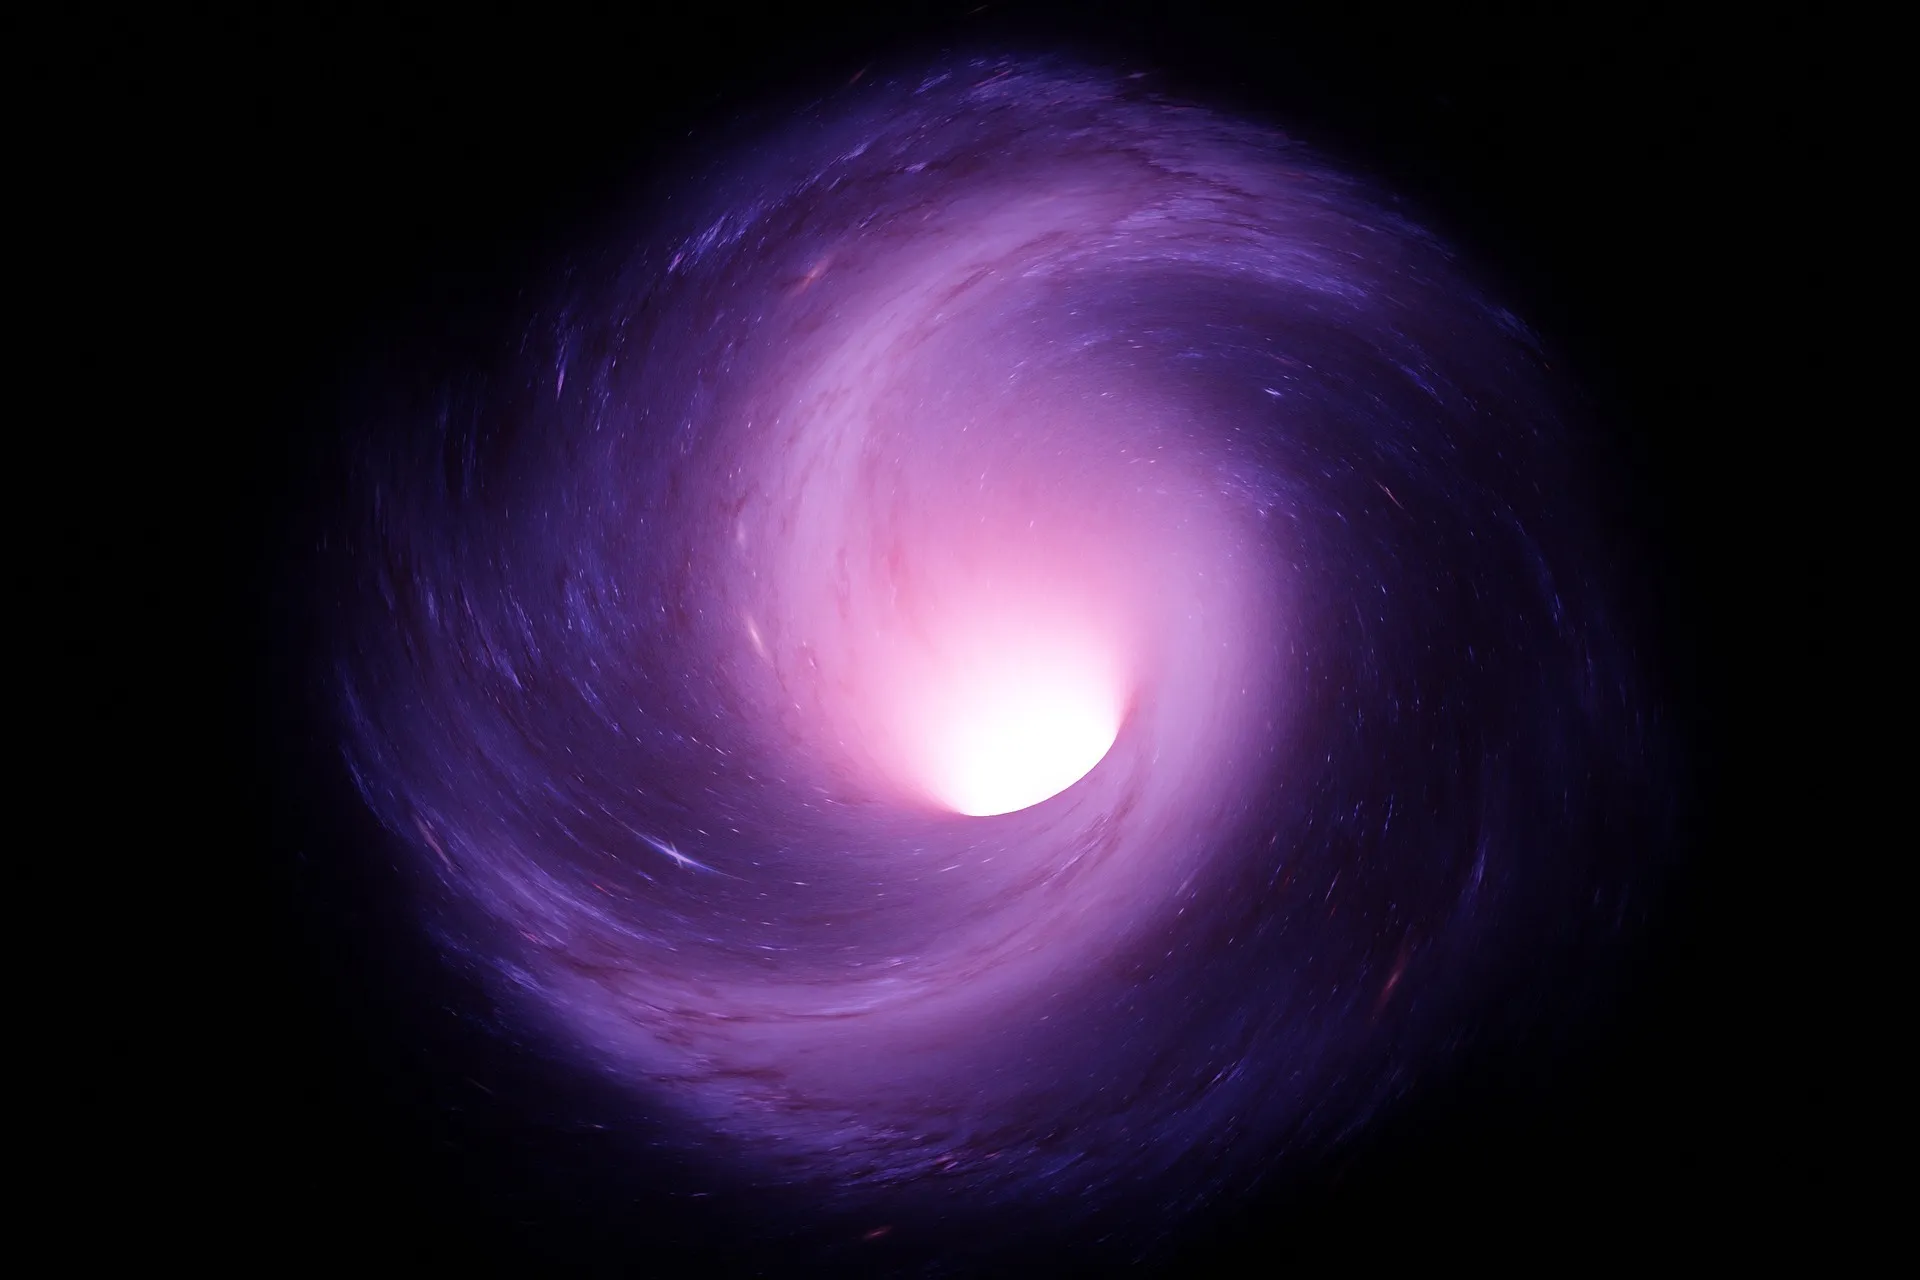 A spiral galaxy showcasing a luminous core, emanating a brilliant light, surrounded by a mysterious black hole.